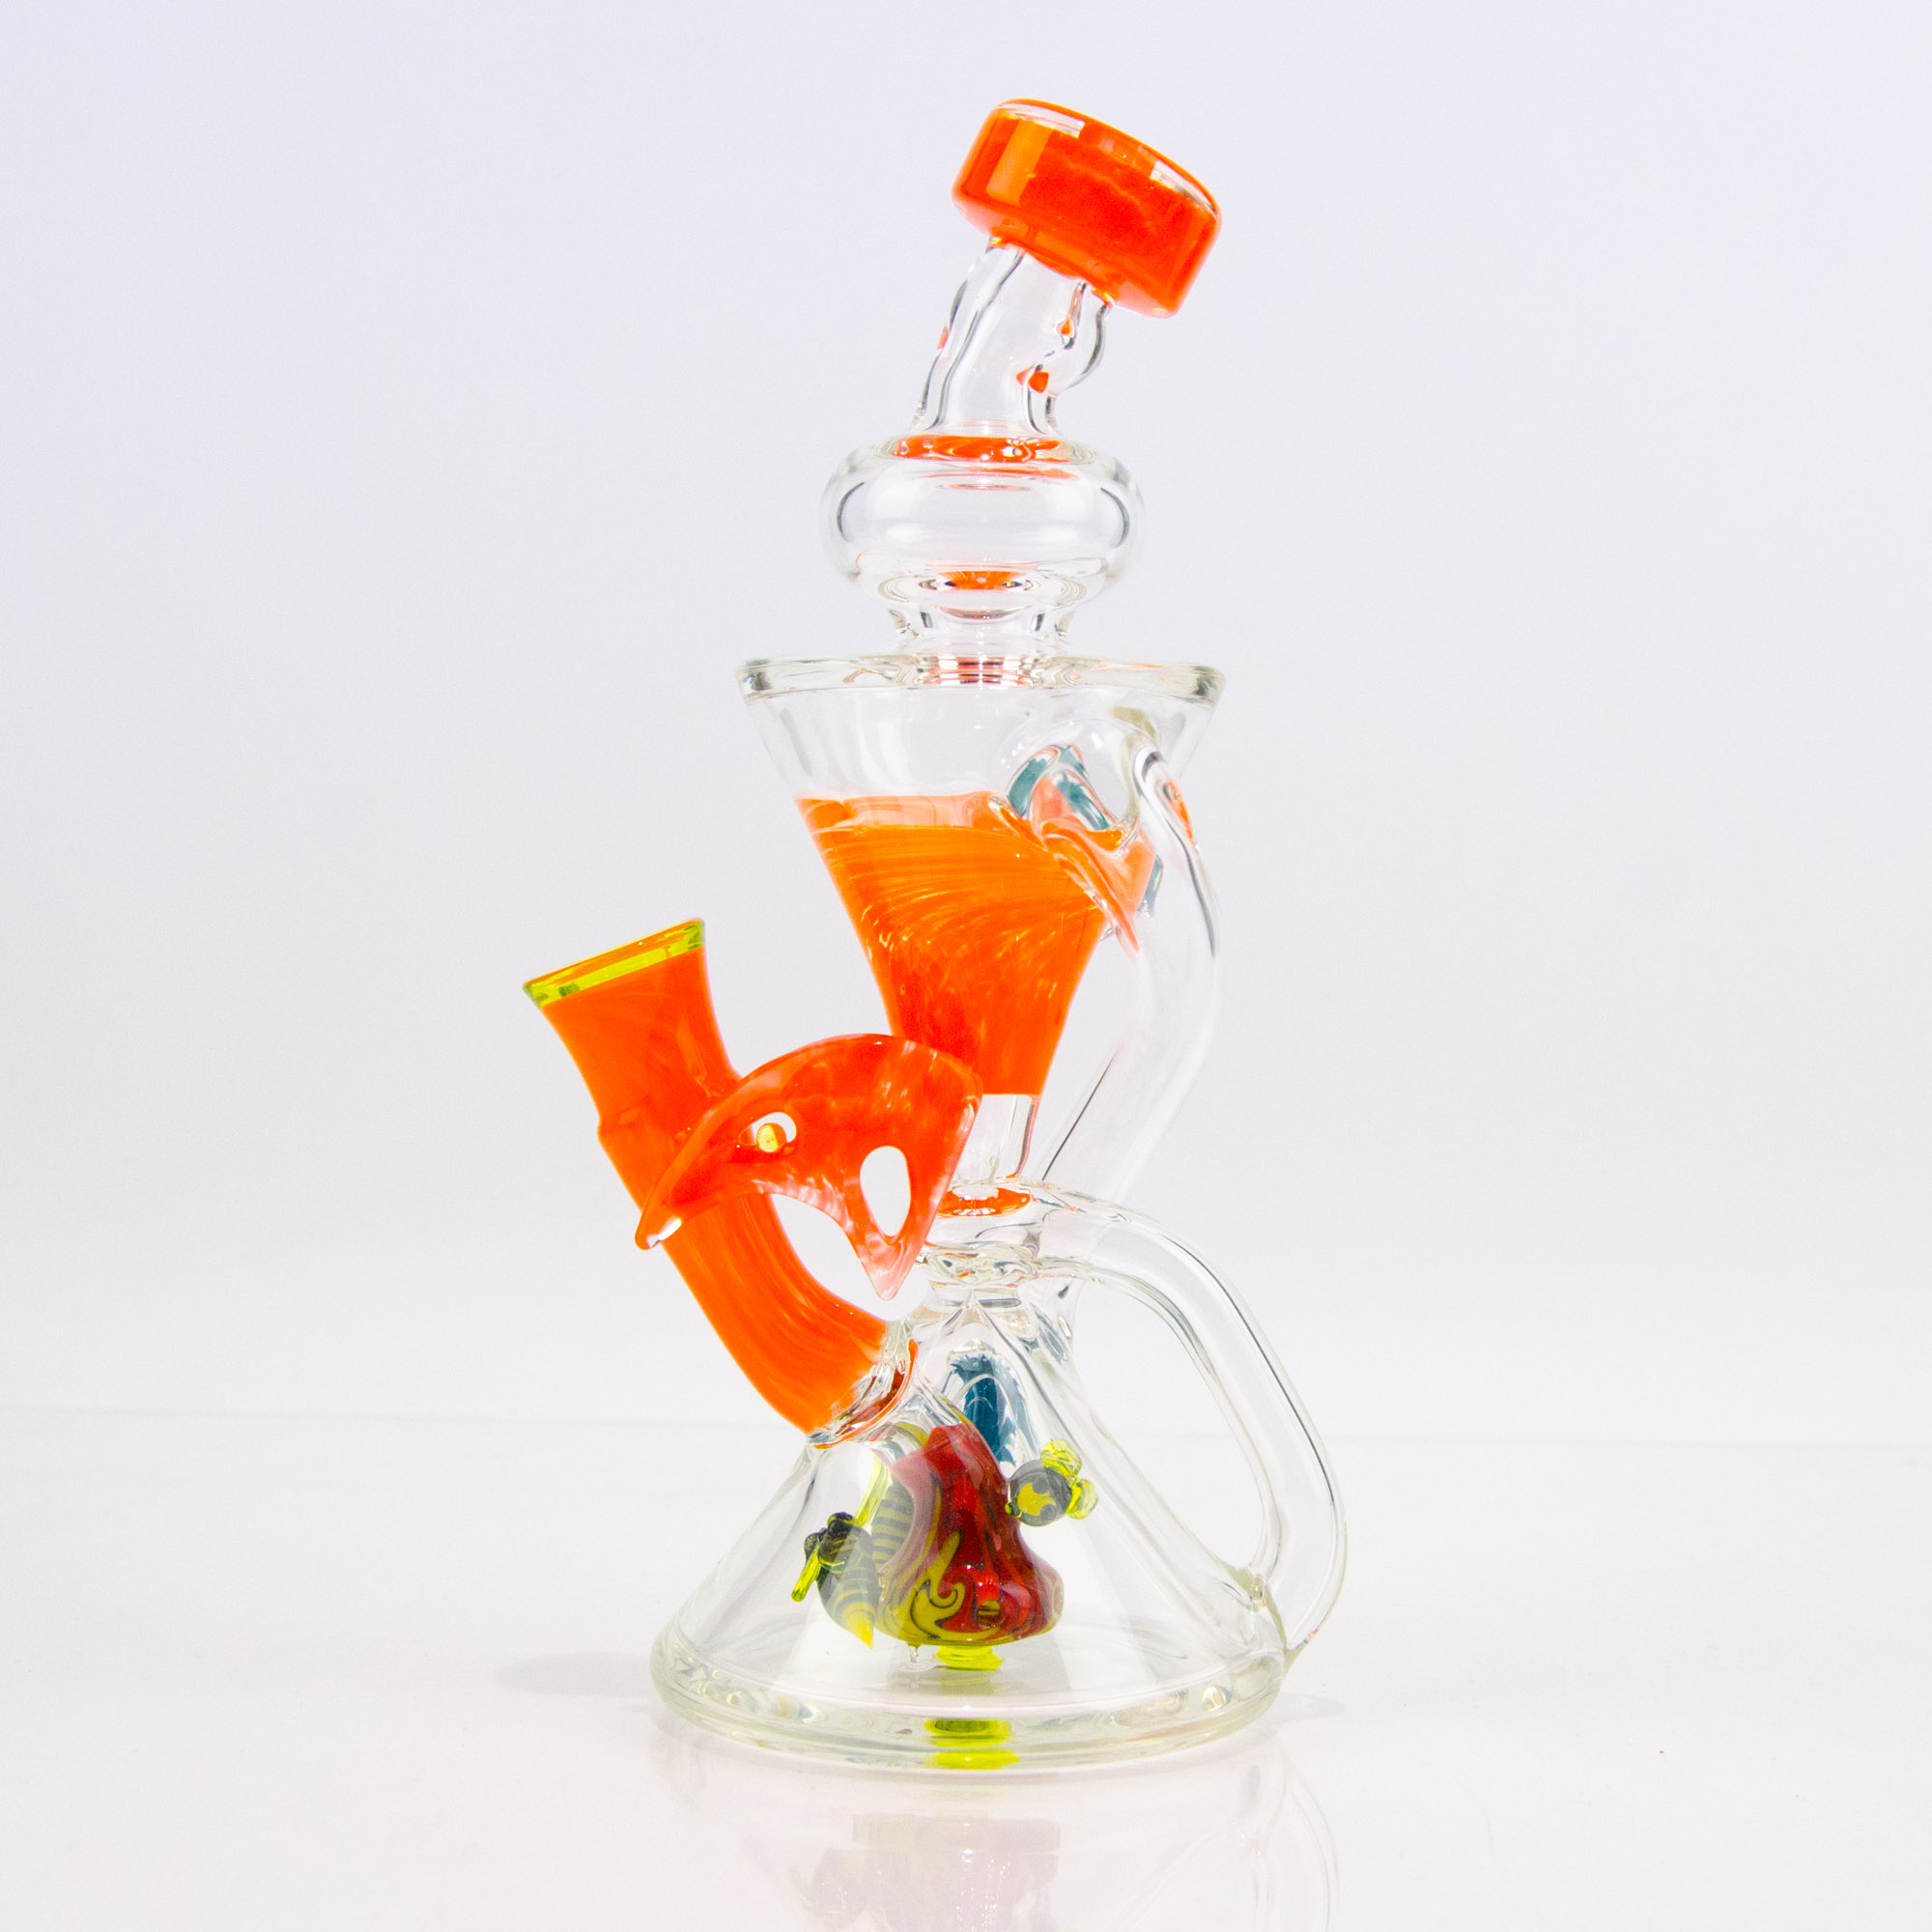 Elev8 The Bees Rig #14